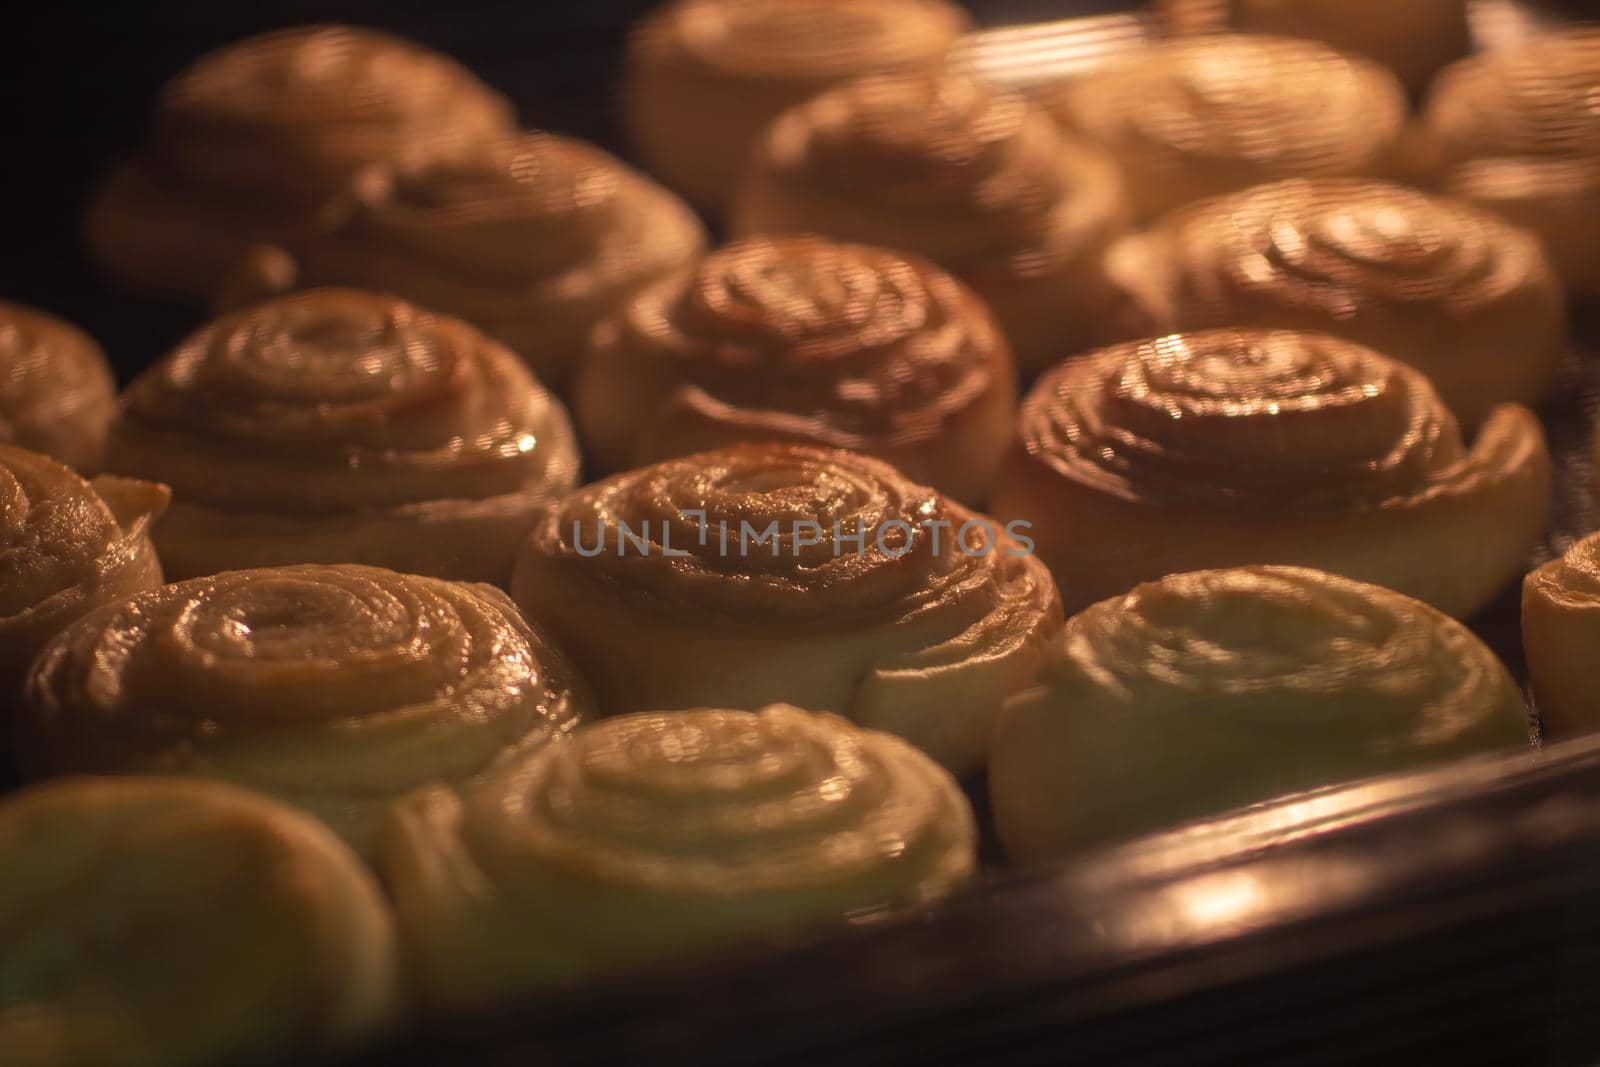 baking sweet dough buns in the oven close-up. the selected focus.